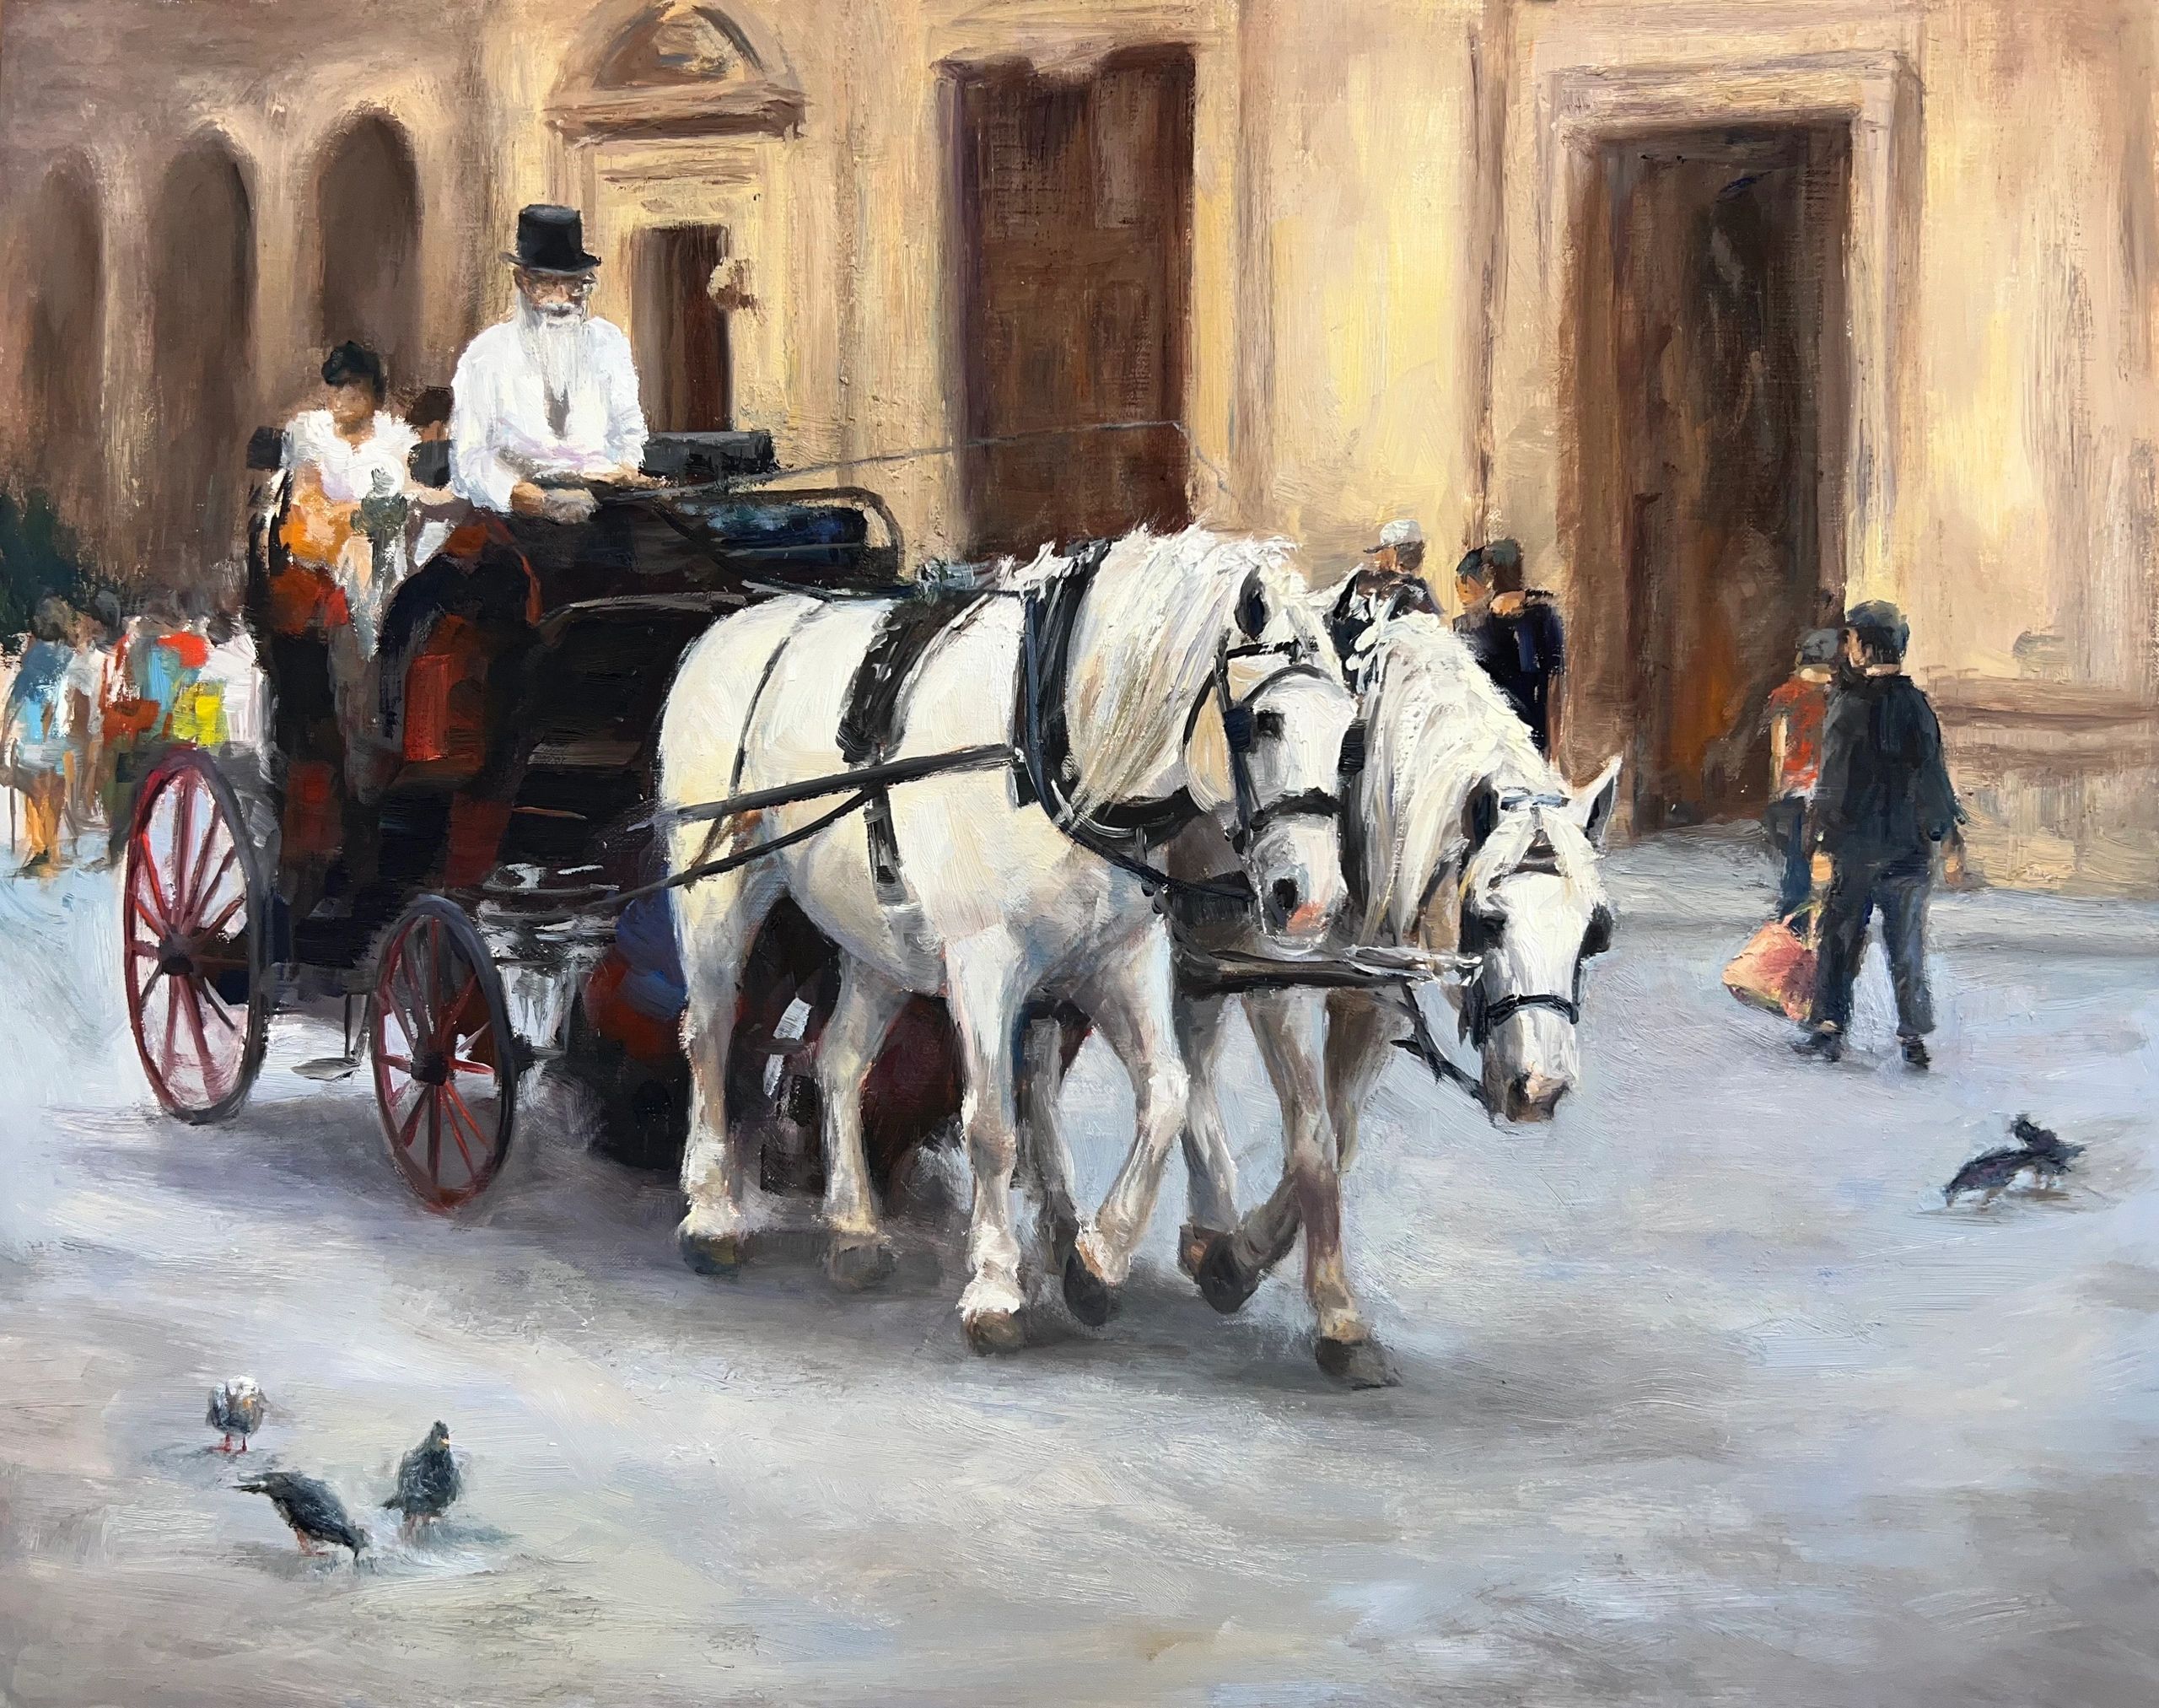 A dynamic team of tuscan trotters are depicted in this original oil by equine artist Carol Roark